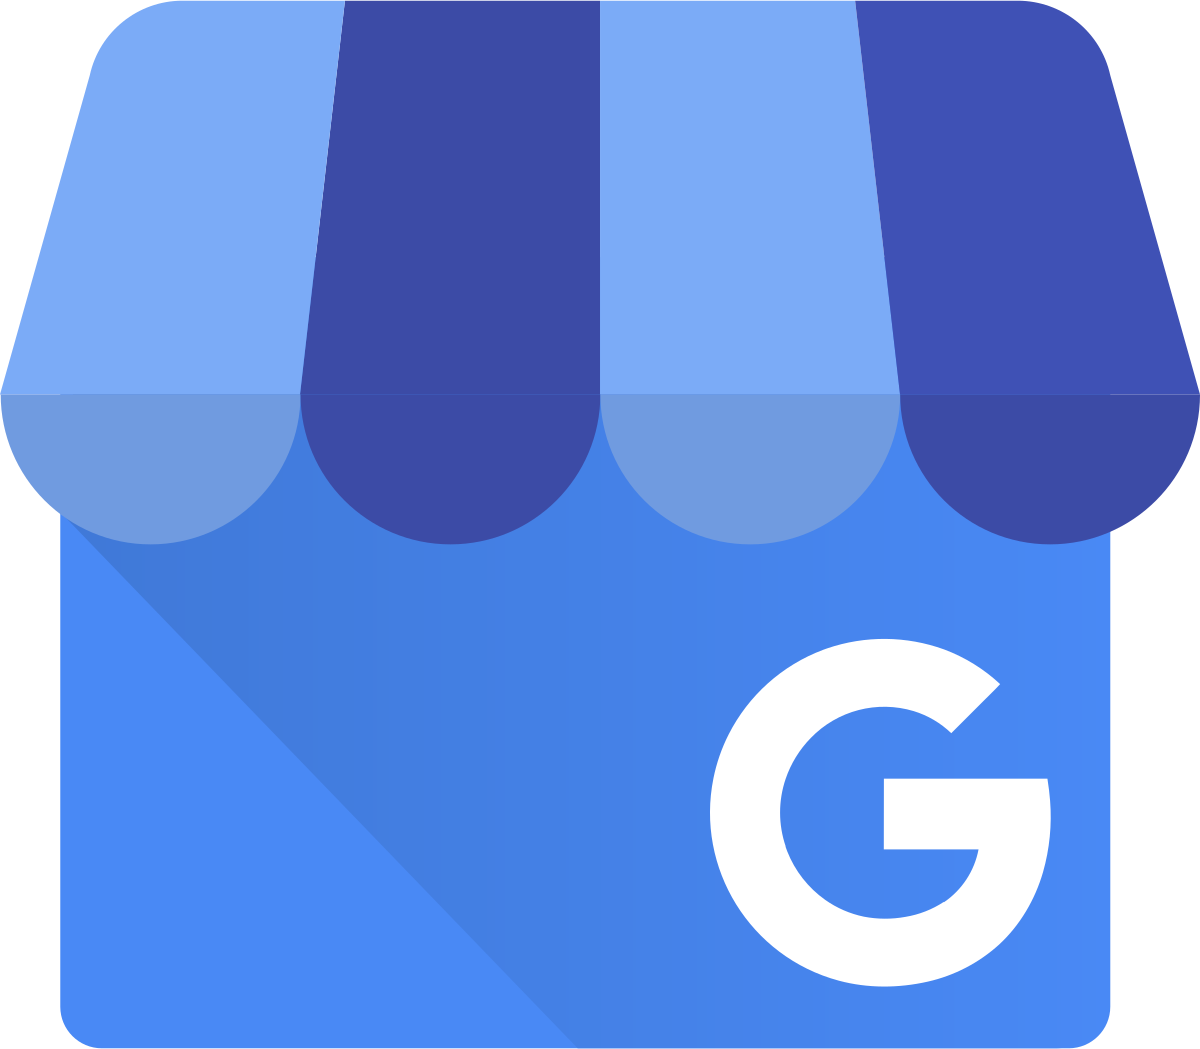 Google My Business current logo, subject to frequent change.